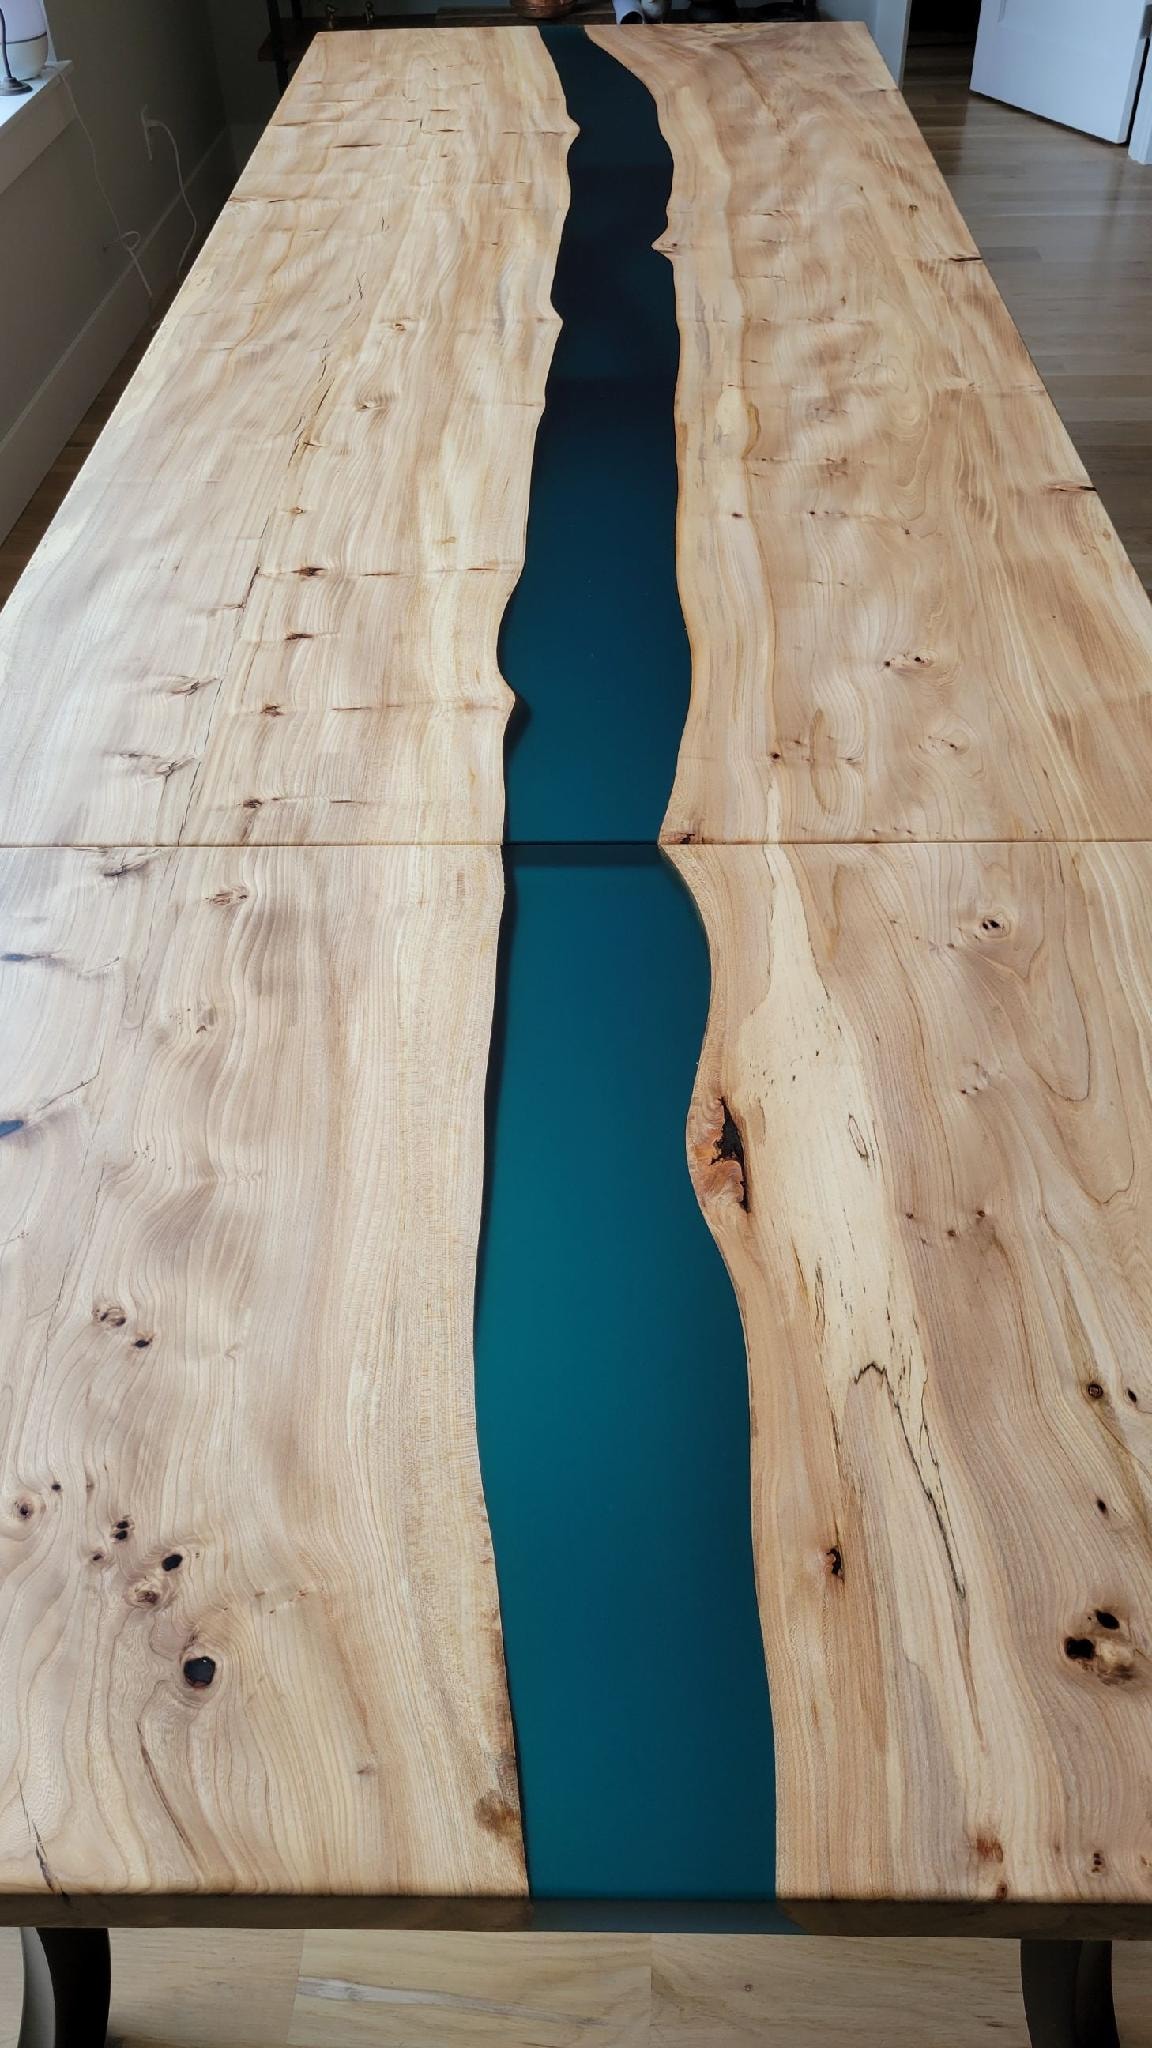 How to Make a Colored Epoxy Resin Table 